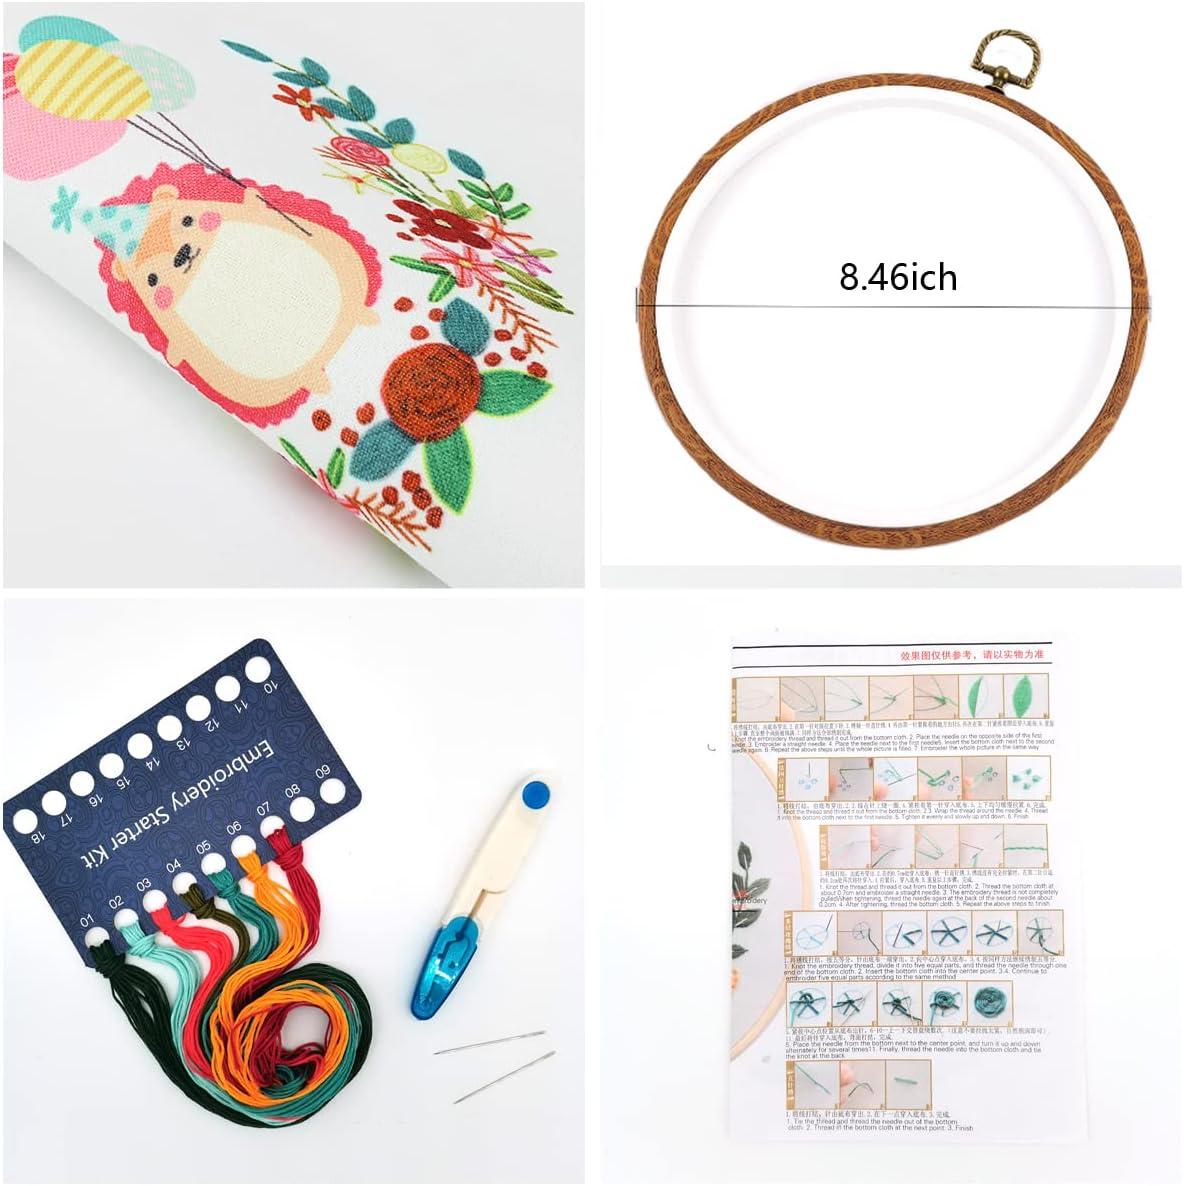 Maydear Stamped Embroidery Kit for Beginners with Pattern Cross Stitch kit Embroidery  Starter Kit Including Embroidery Hoop Color Threads and Embroidery Scissors  - Herborist4